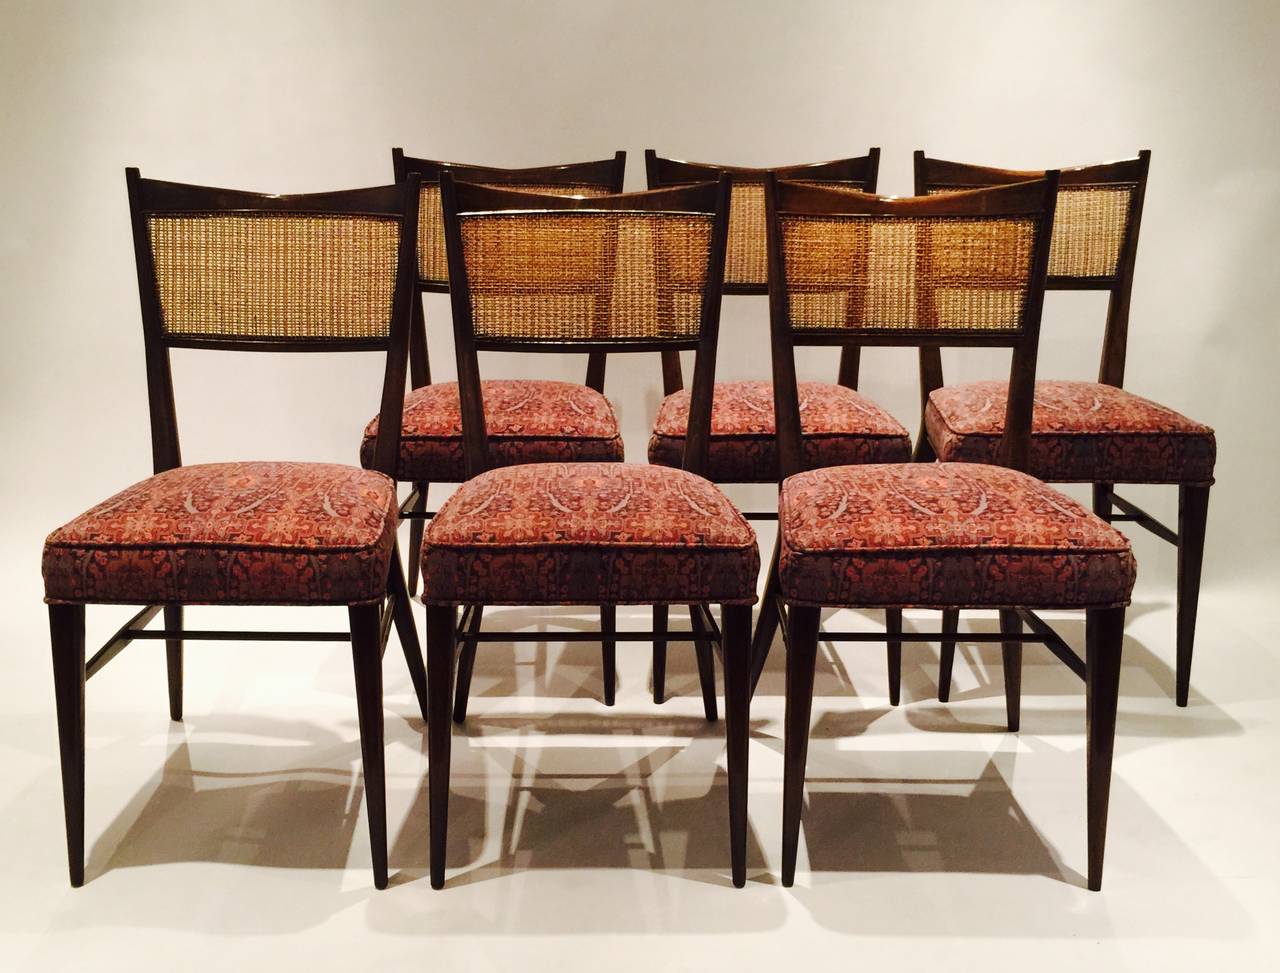 A Set Of Eight Paul McCobb Dining Chairs With Caned Backs.  Two Armchairs And Six Side Chairs.  Two Of The Side Chairs Appear To Be Matched. Dimensions Listed Are For The Armchairs Which Are Slightly Larger Than The Side Chairs.